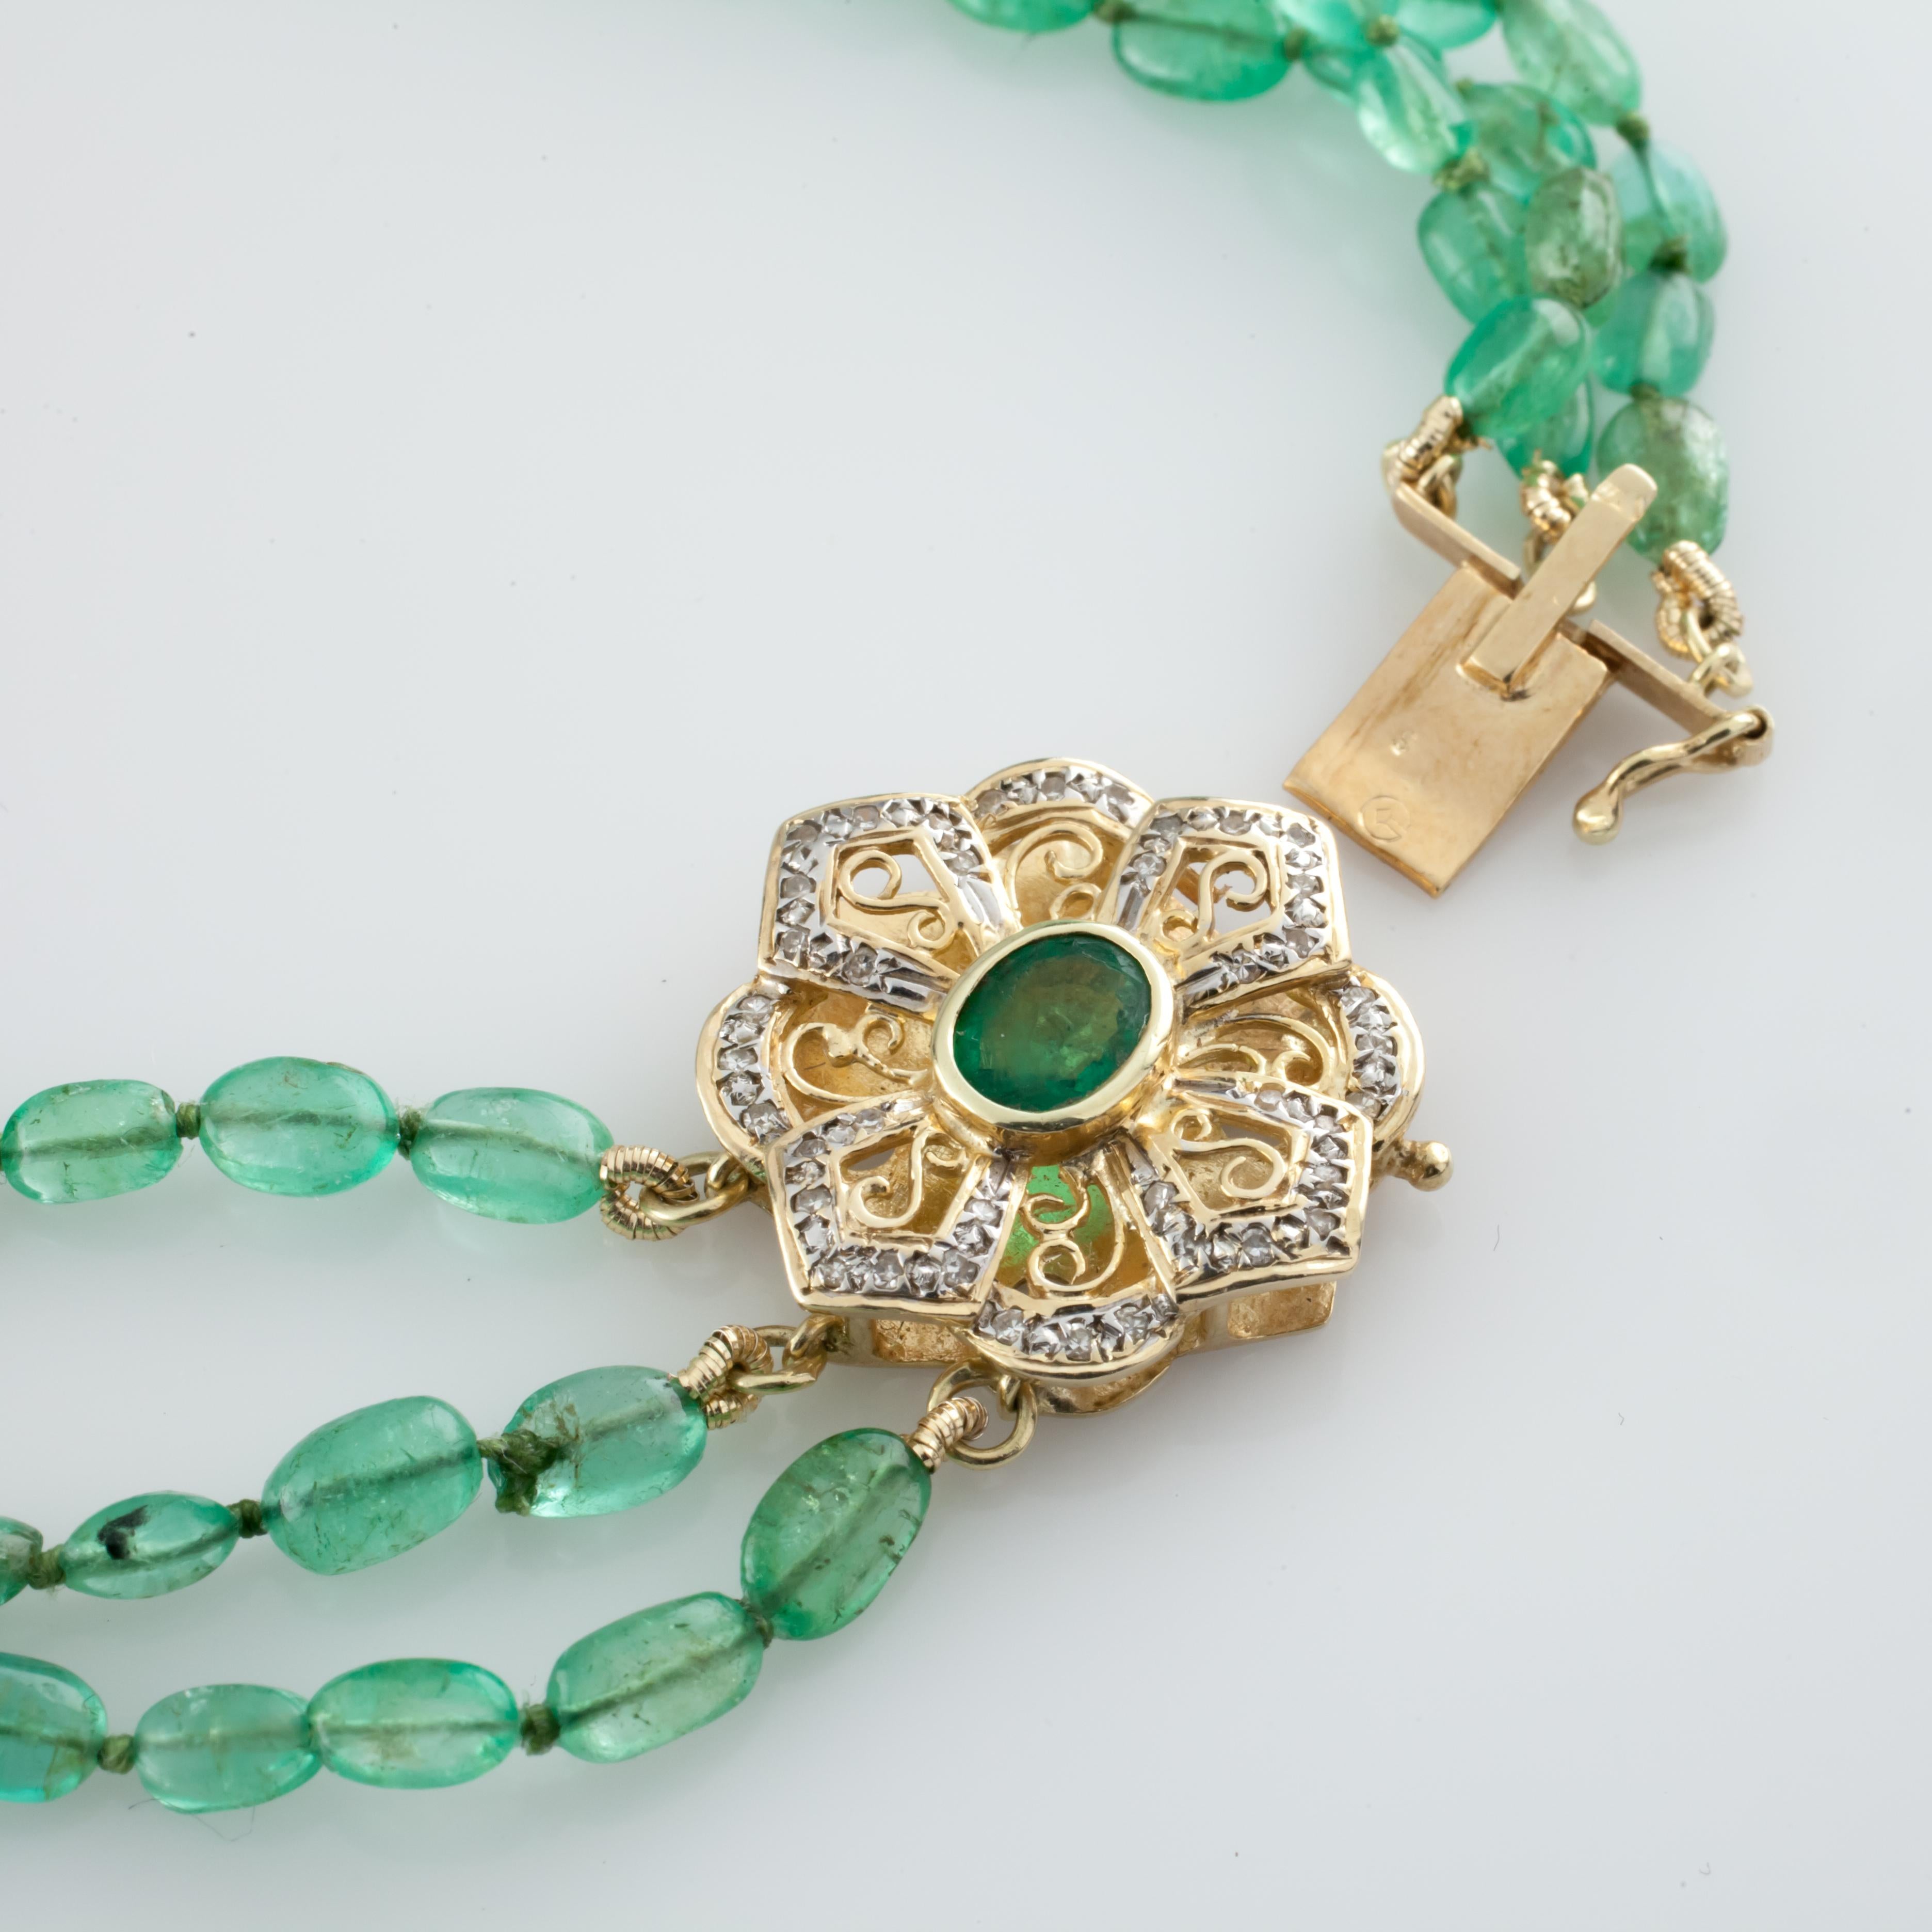 Cabochon Polished Emerald 400 Carat Three-Strand Necklace with Diamond 14k Gold Clasp For Sale